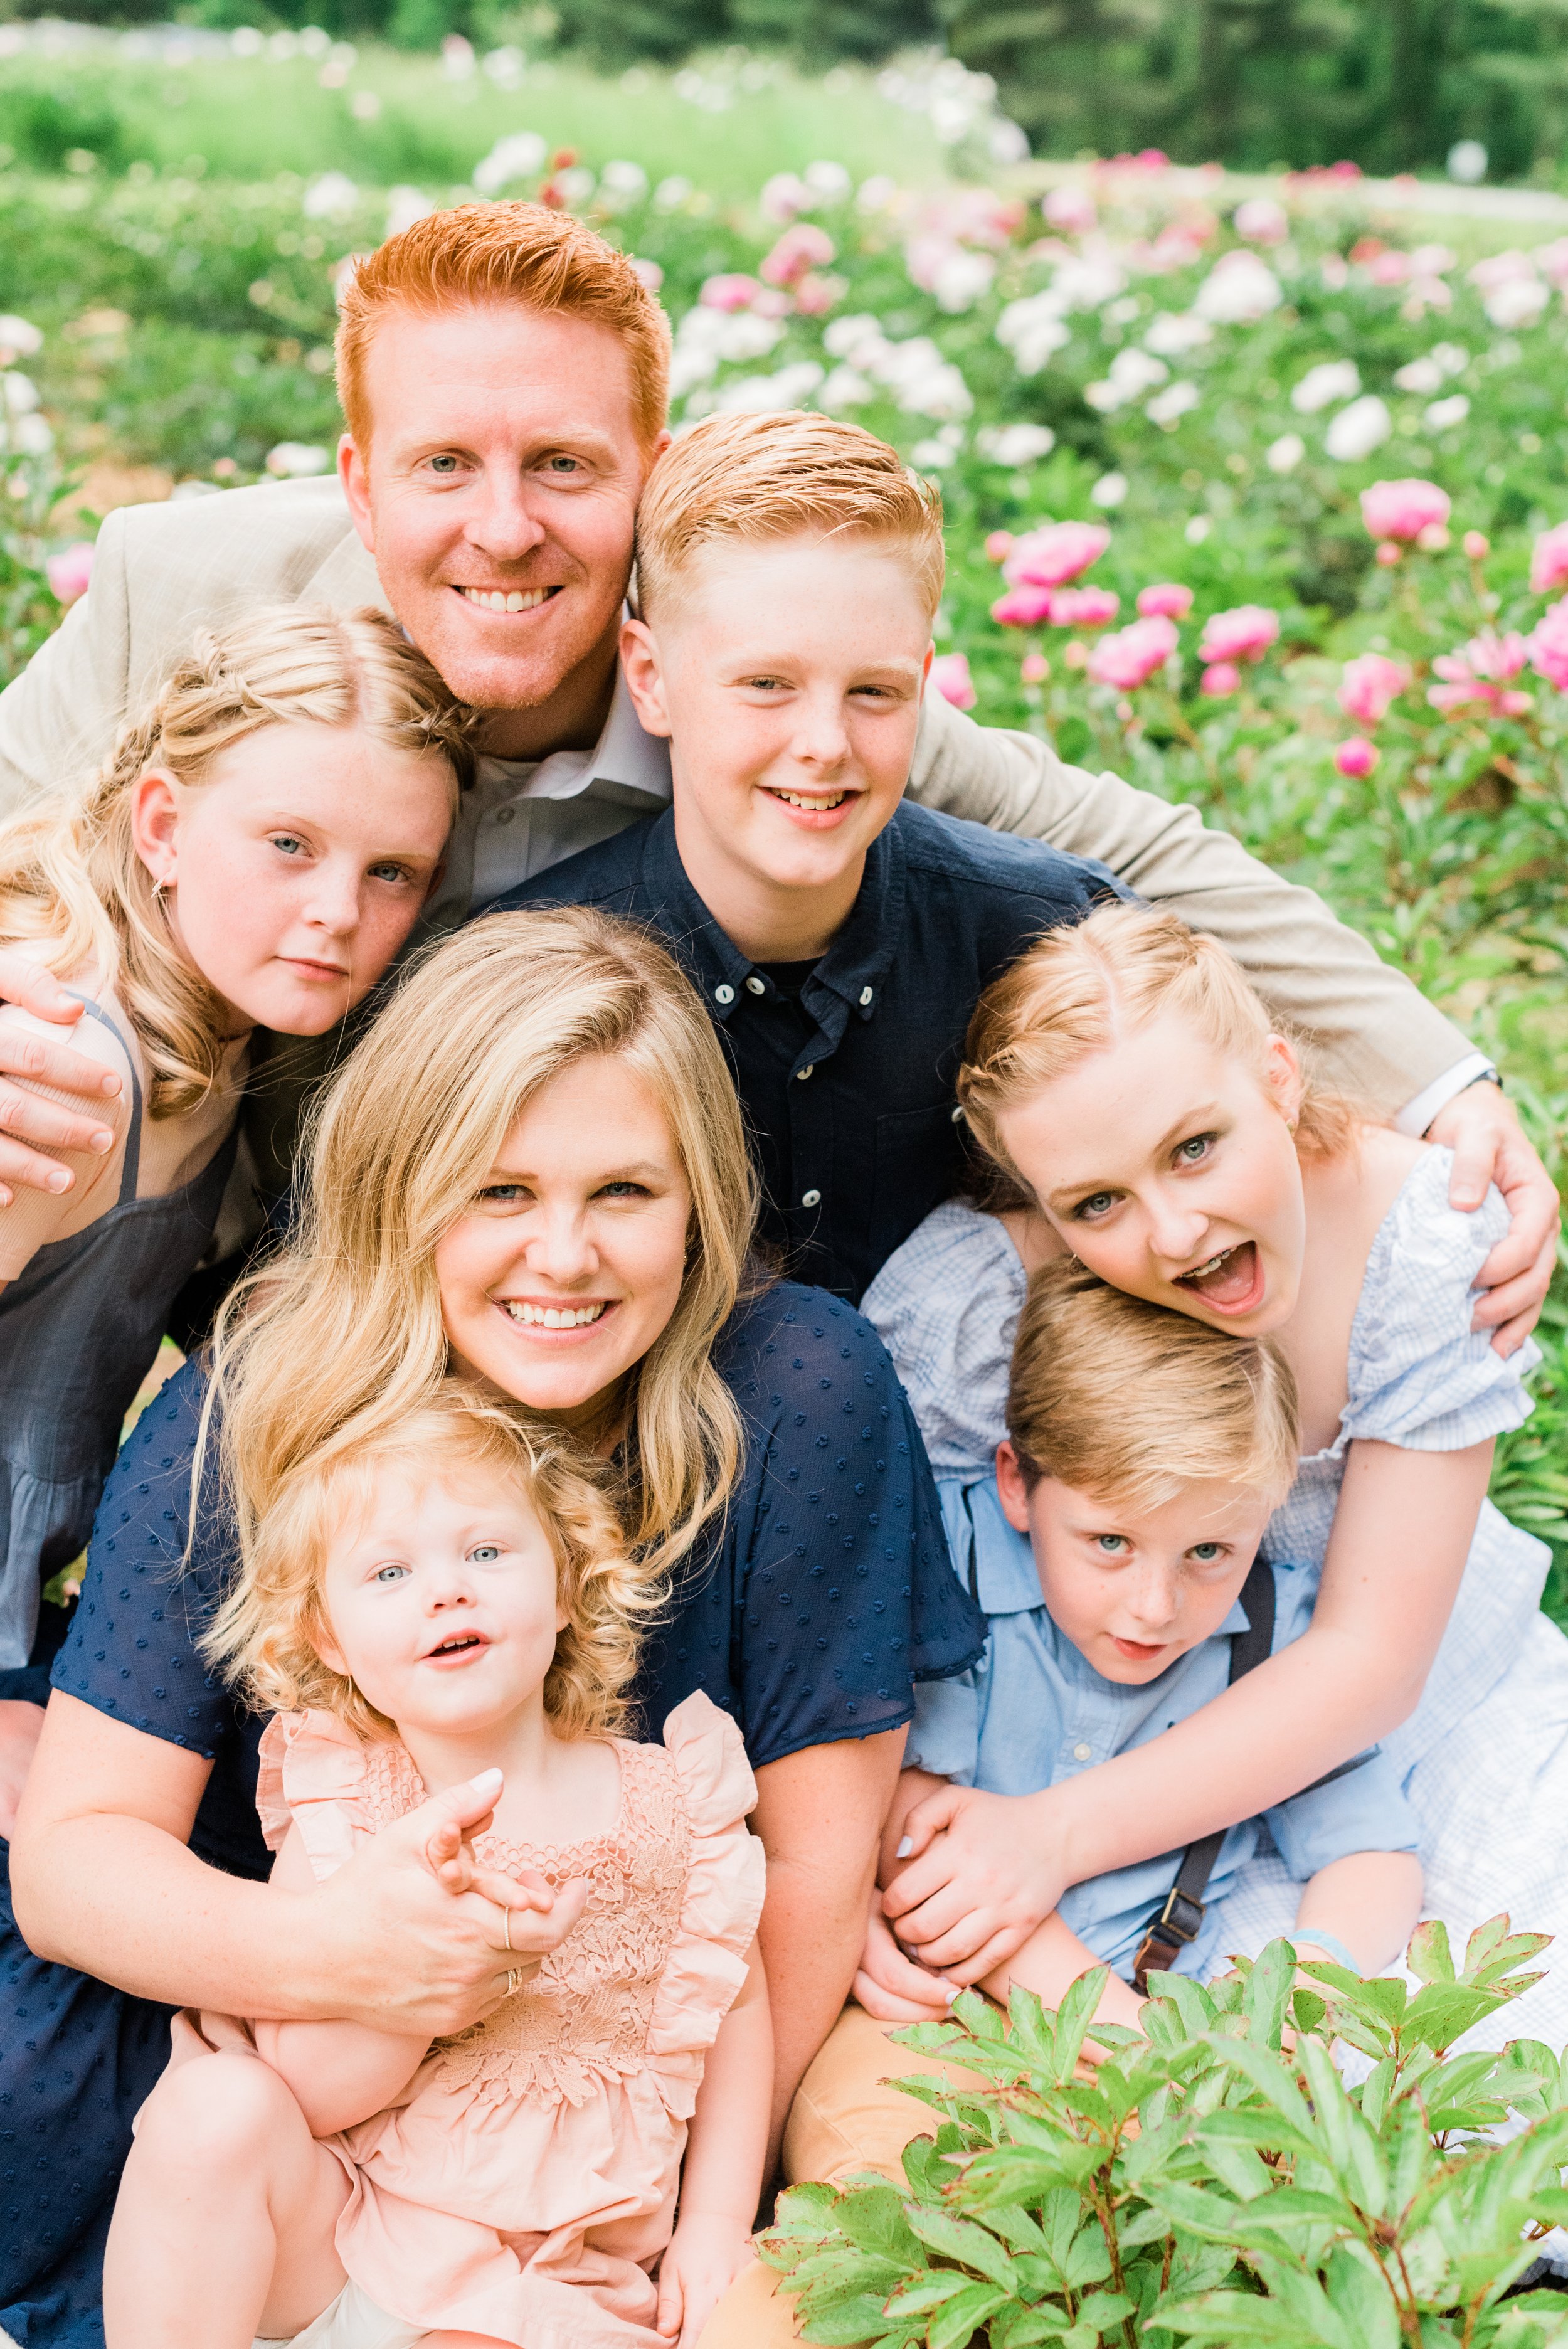  A family of seven smiles and makes faces at the camera during a family photo shoot by Jacquie Erickson. Capturing personality personalized photoshoot #atlantafamilyphotographer #familiesofinstagram #familypics #GeorgiaFamilyPhotographer 